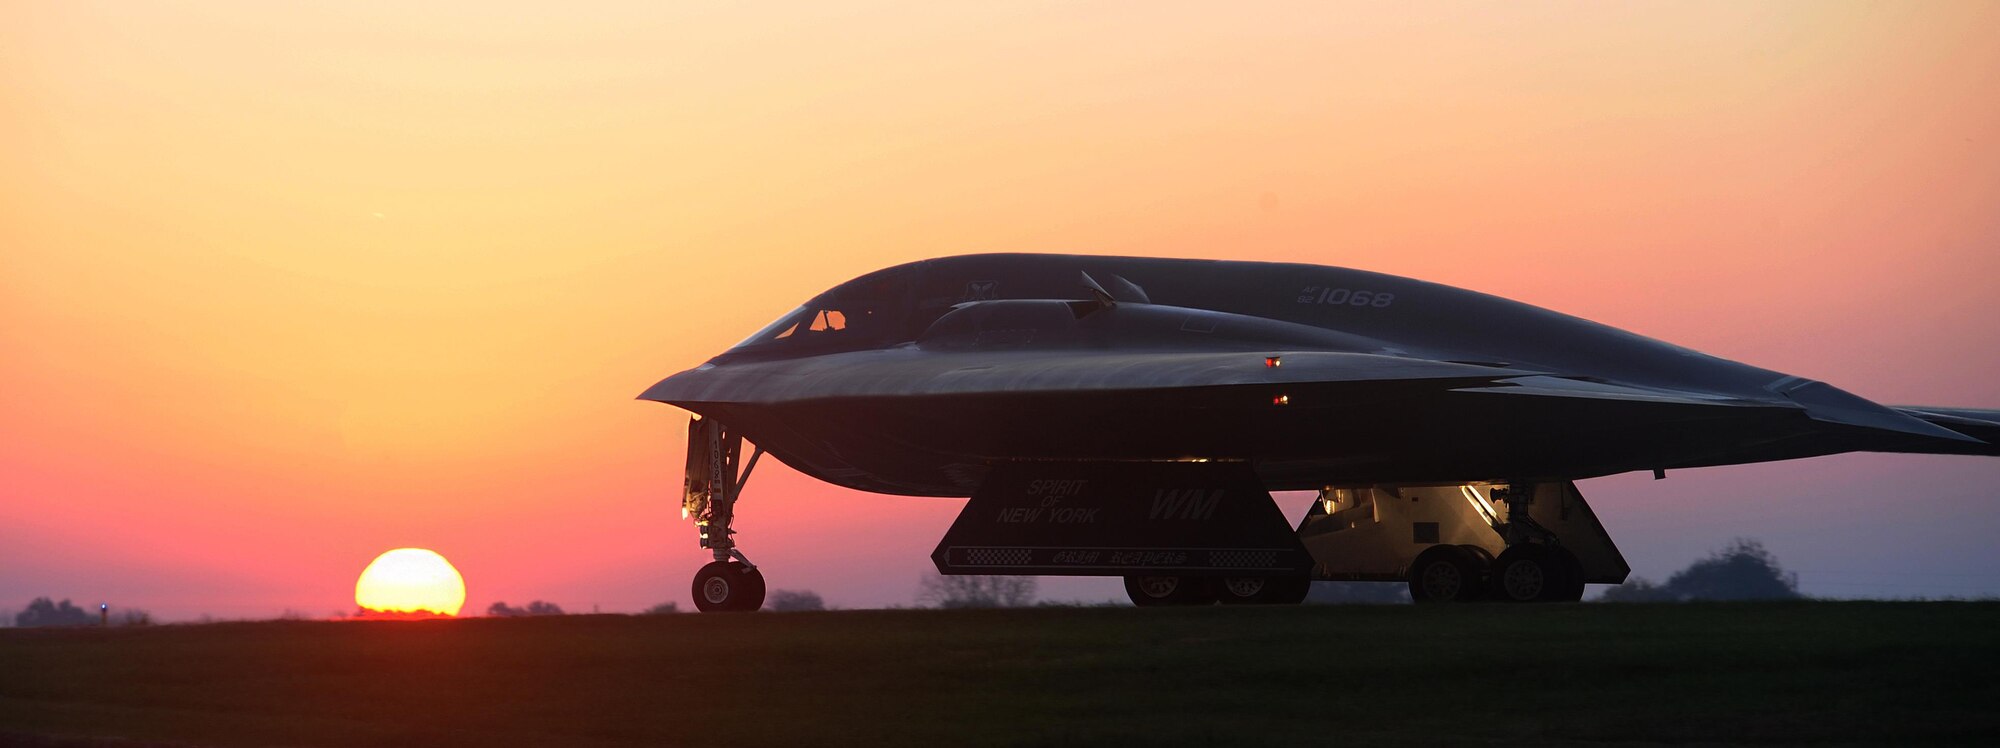 U.S. Air Force B-2 Spirit bomber aircraft from Whiteman Air Force Base, Missouri, like the one pictured above, deploy to Andersen Air Force Base, Guam, as a routine deployment providing global strike capability and extended deterrence against potential adversaries in the Indo-Asia-Pacific region. (U.S. Air Force photo by Airman 1st Class Joel Pfiester/Released)